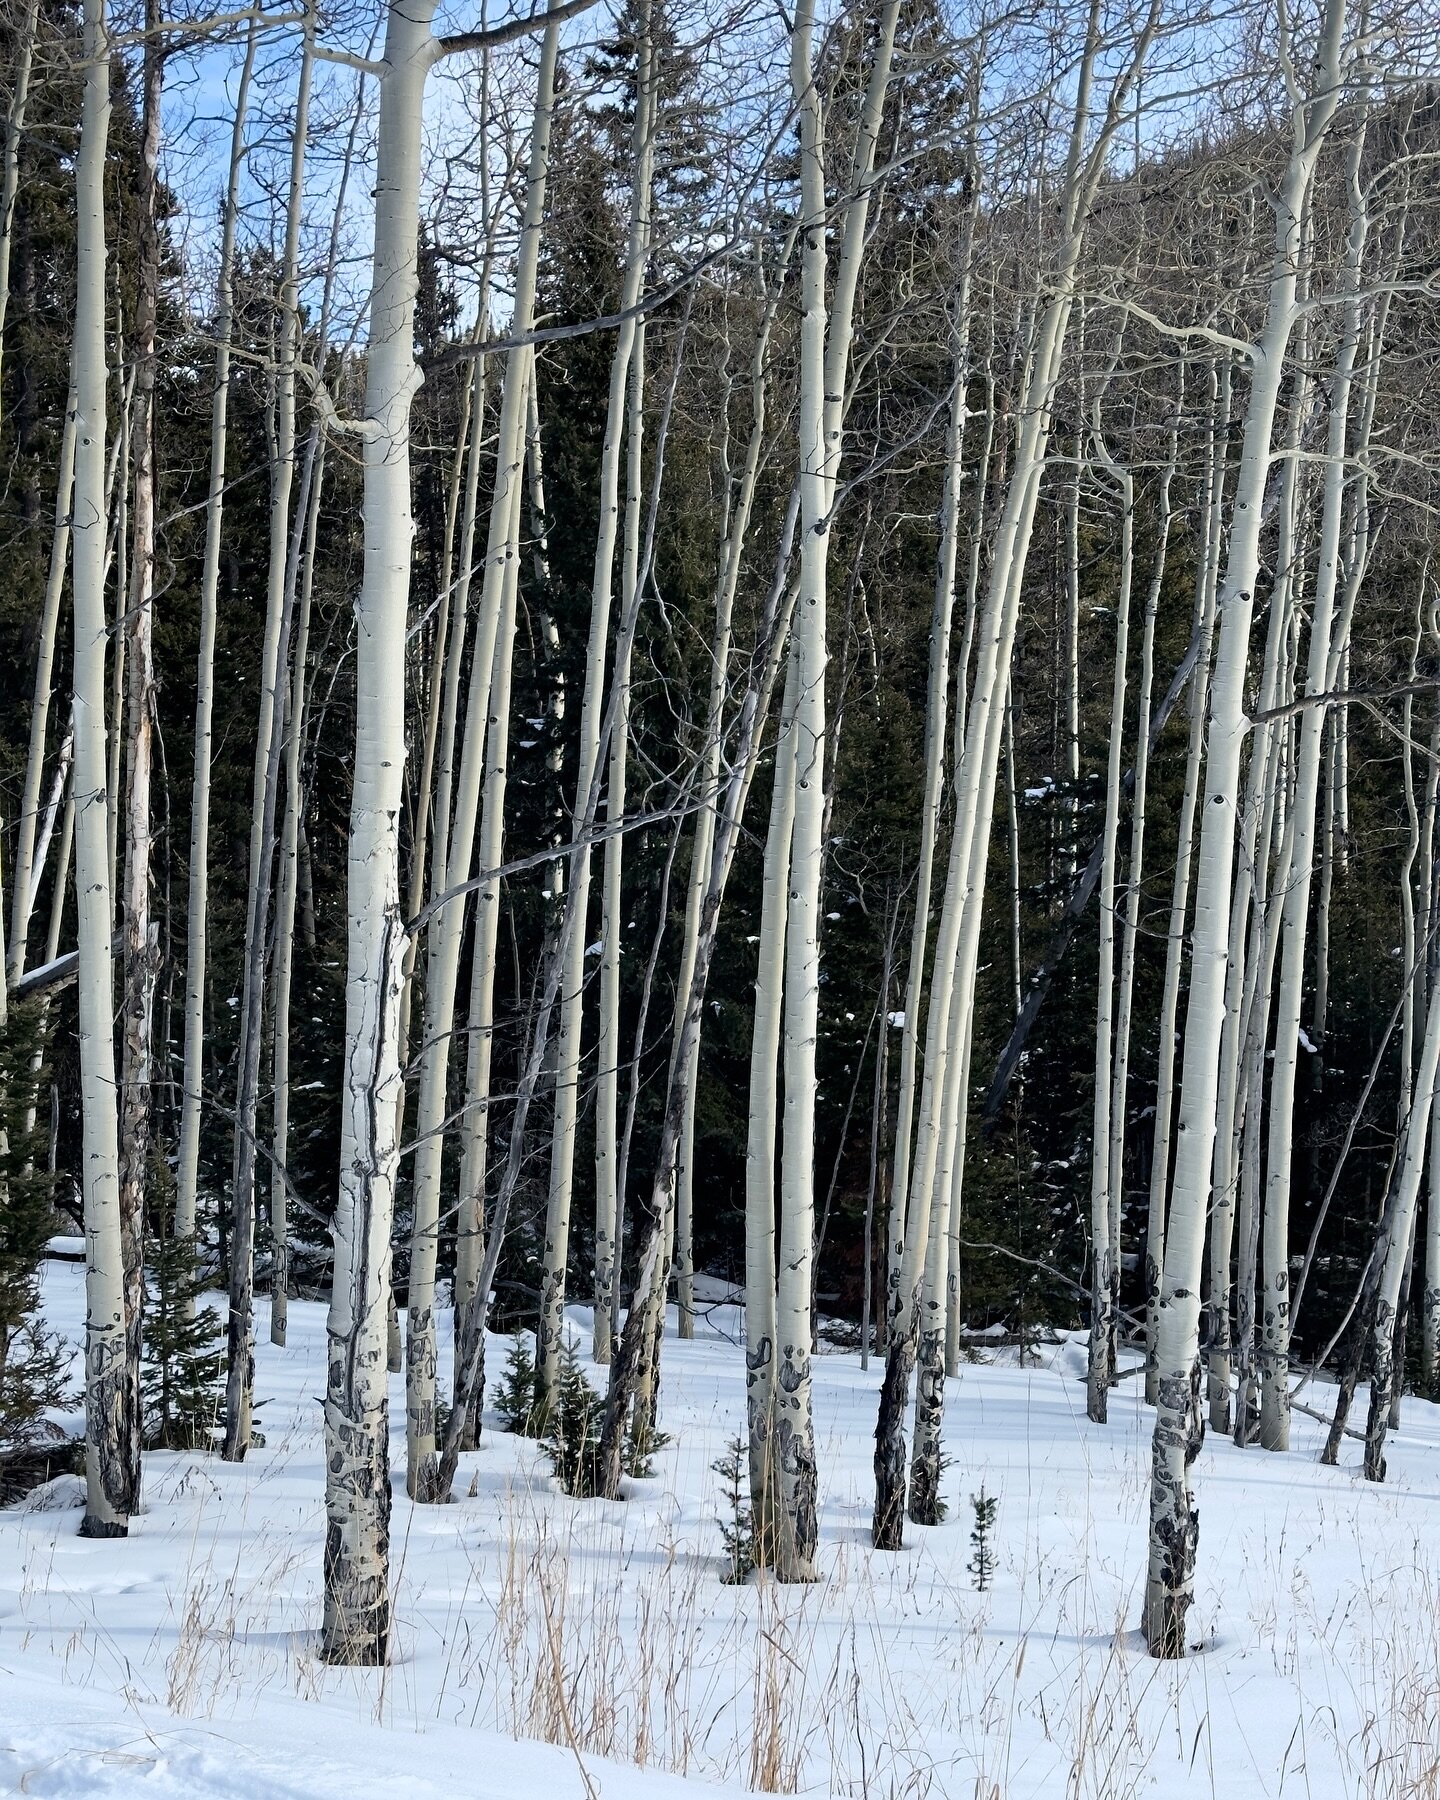 Aspens up near Tipperary Creek. Grand County, Colorado.

There are forty days until spring.